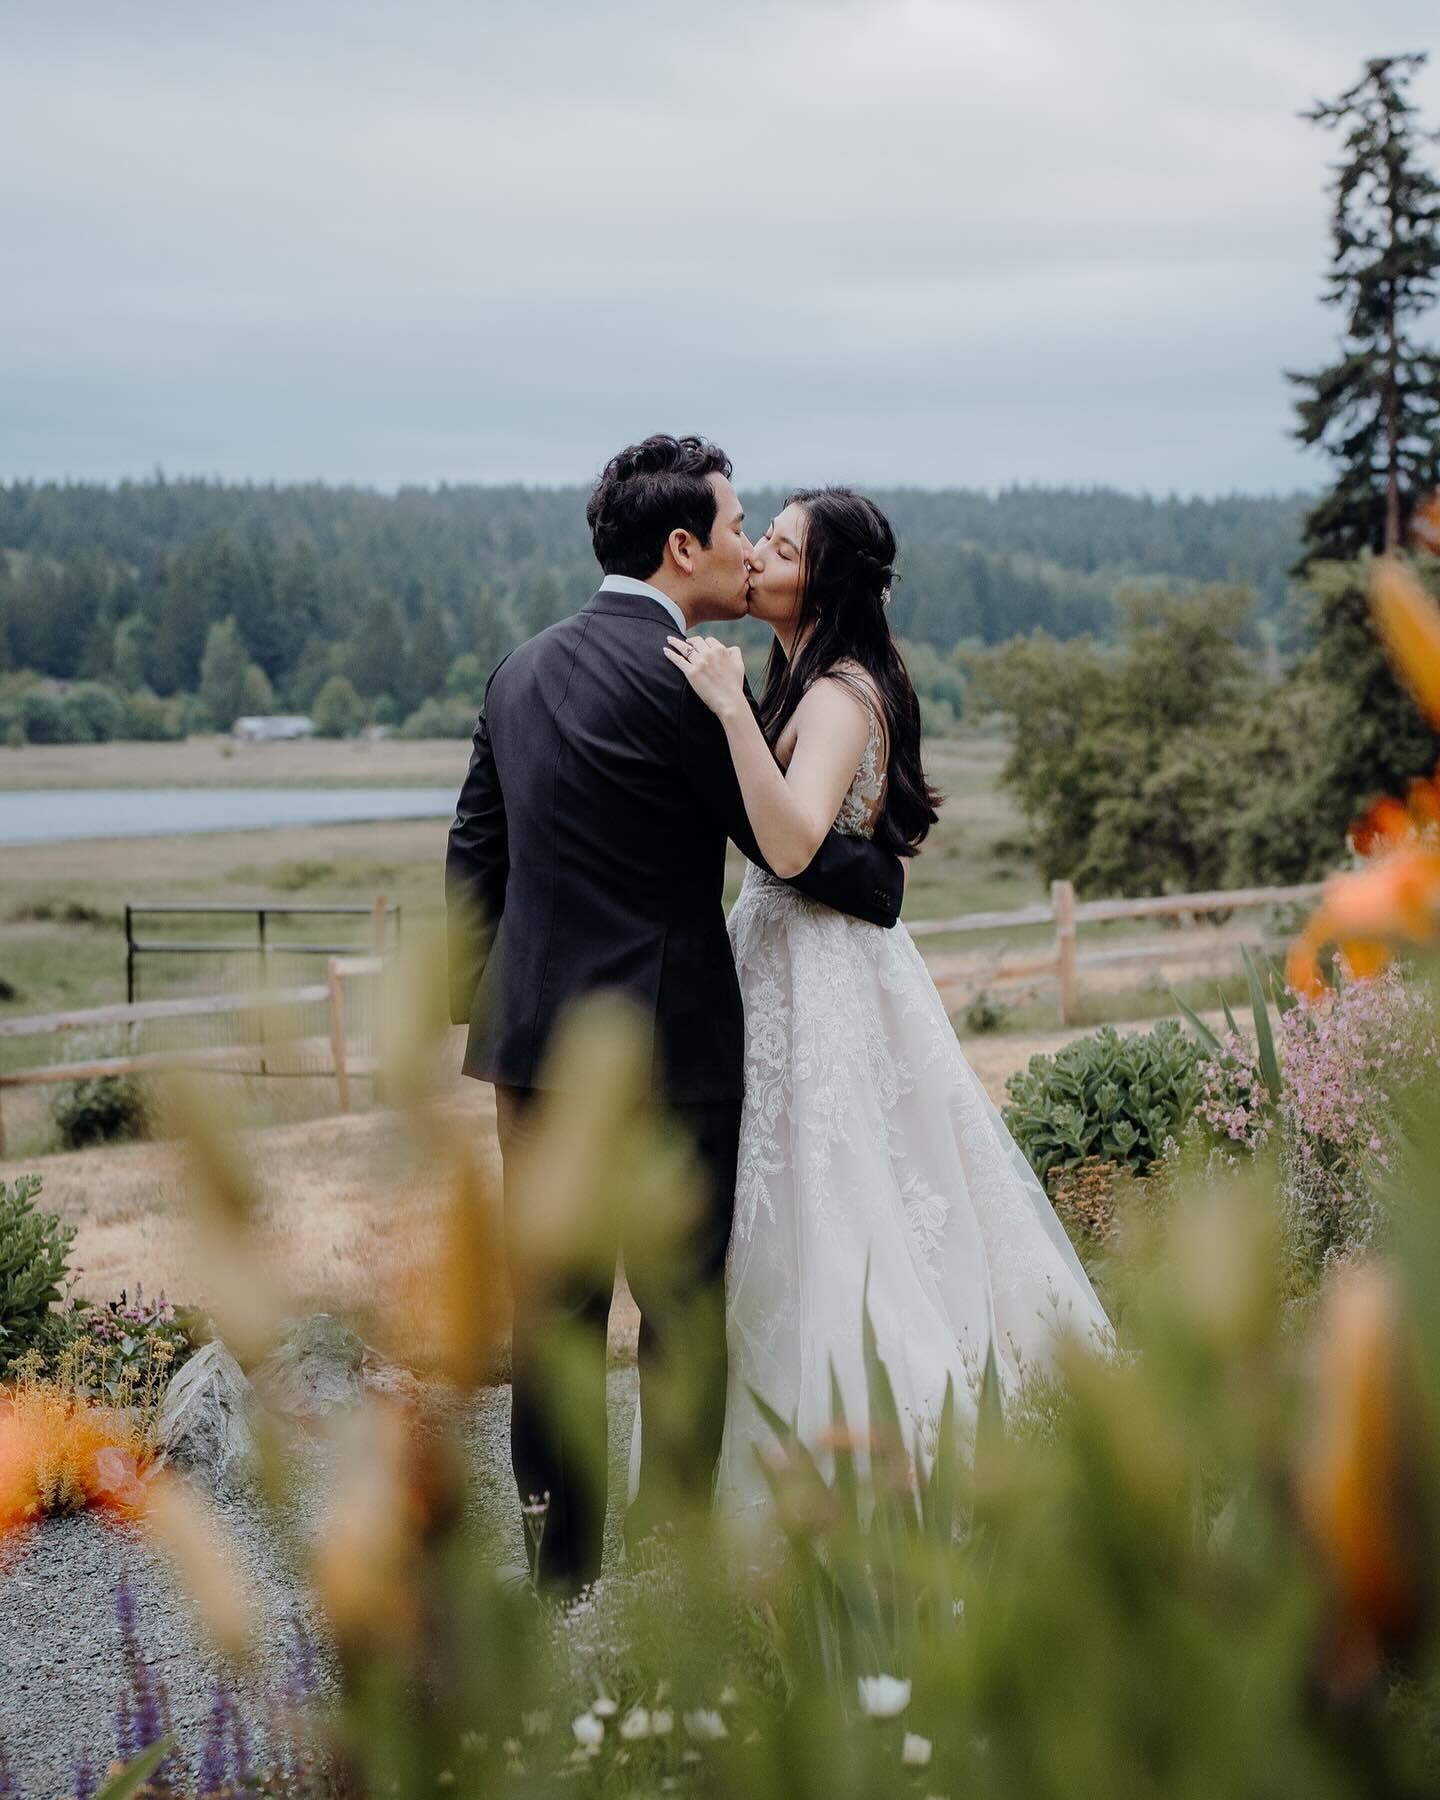 ✨Missing the warmer months✨

It&rsquo;s been a few months since visiting PNW :) Missing the summer months in PNW. 

Who wouldn&rsquo;t want to get married in an evergreen forest? Or next to a snowy mountain? 

✨

✨
#creativephotography #elopementcoll